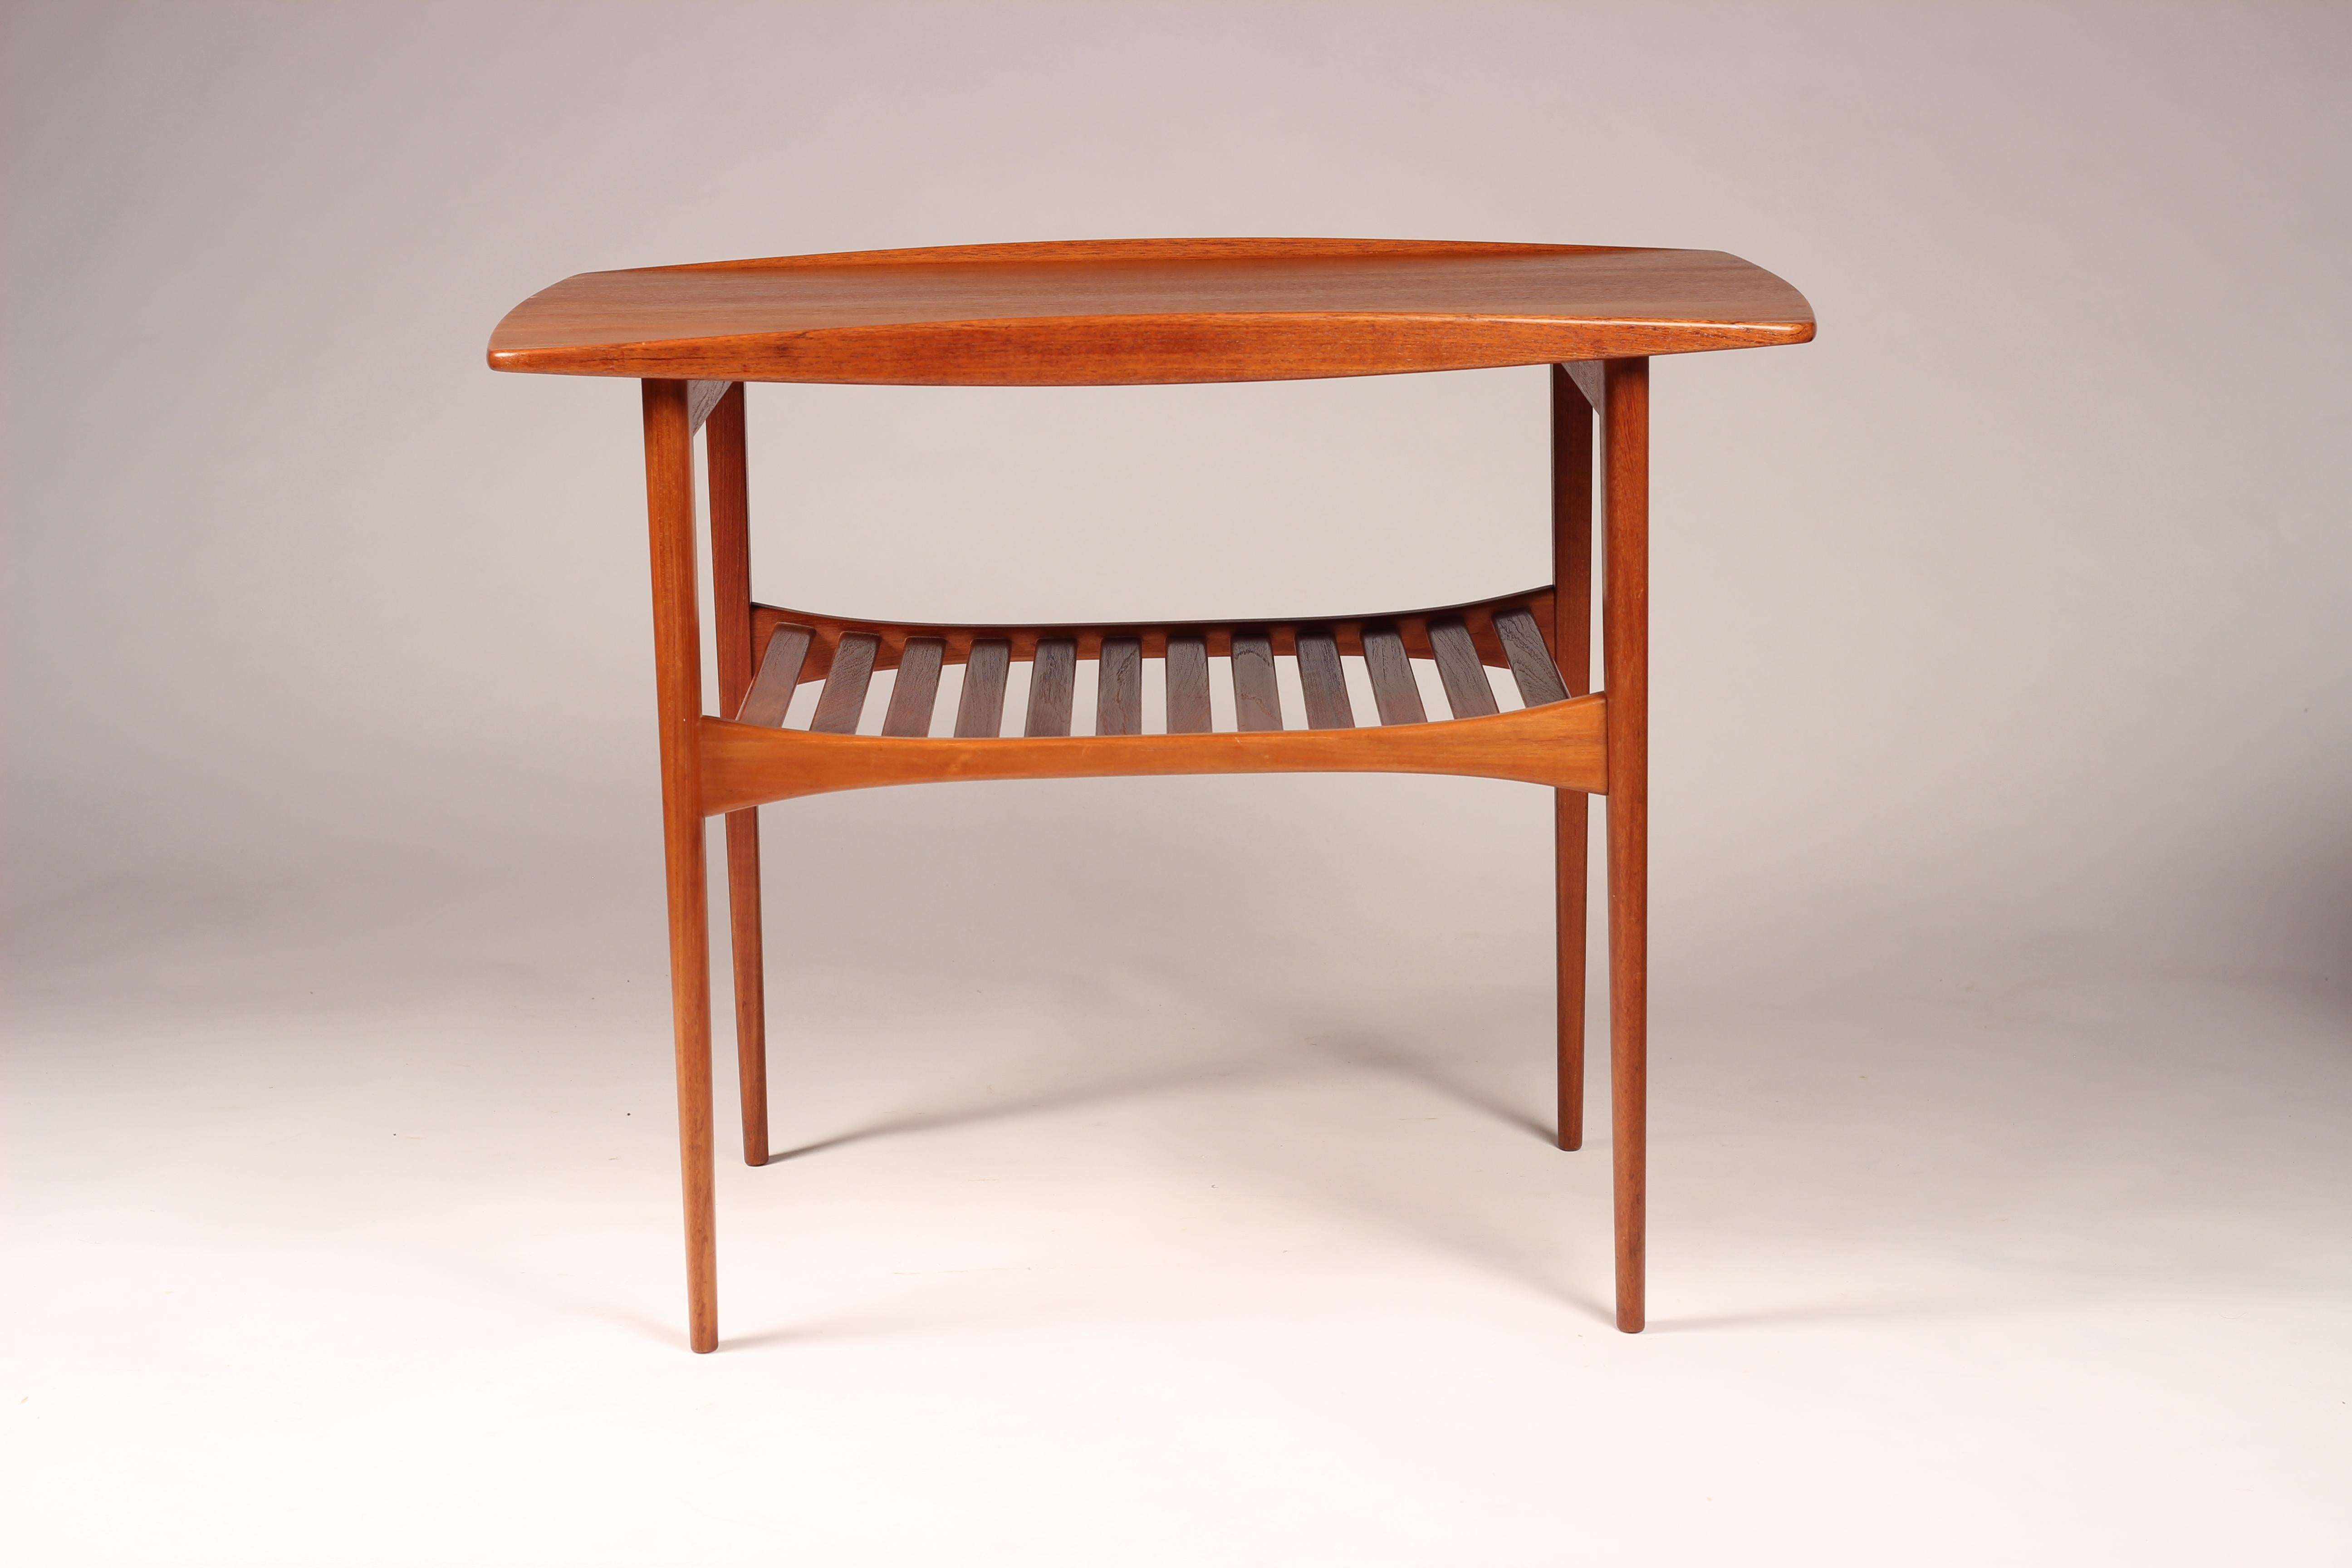 Mid-20th Century Scandinavian Modern Teak Side Table by Tove and Edvard Kindt-Larsen For Sale